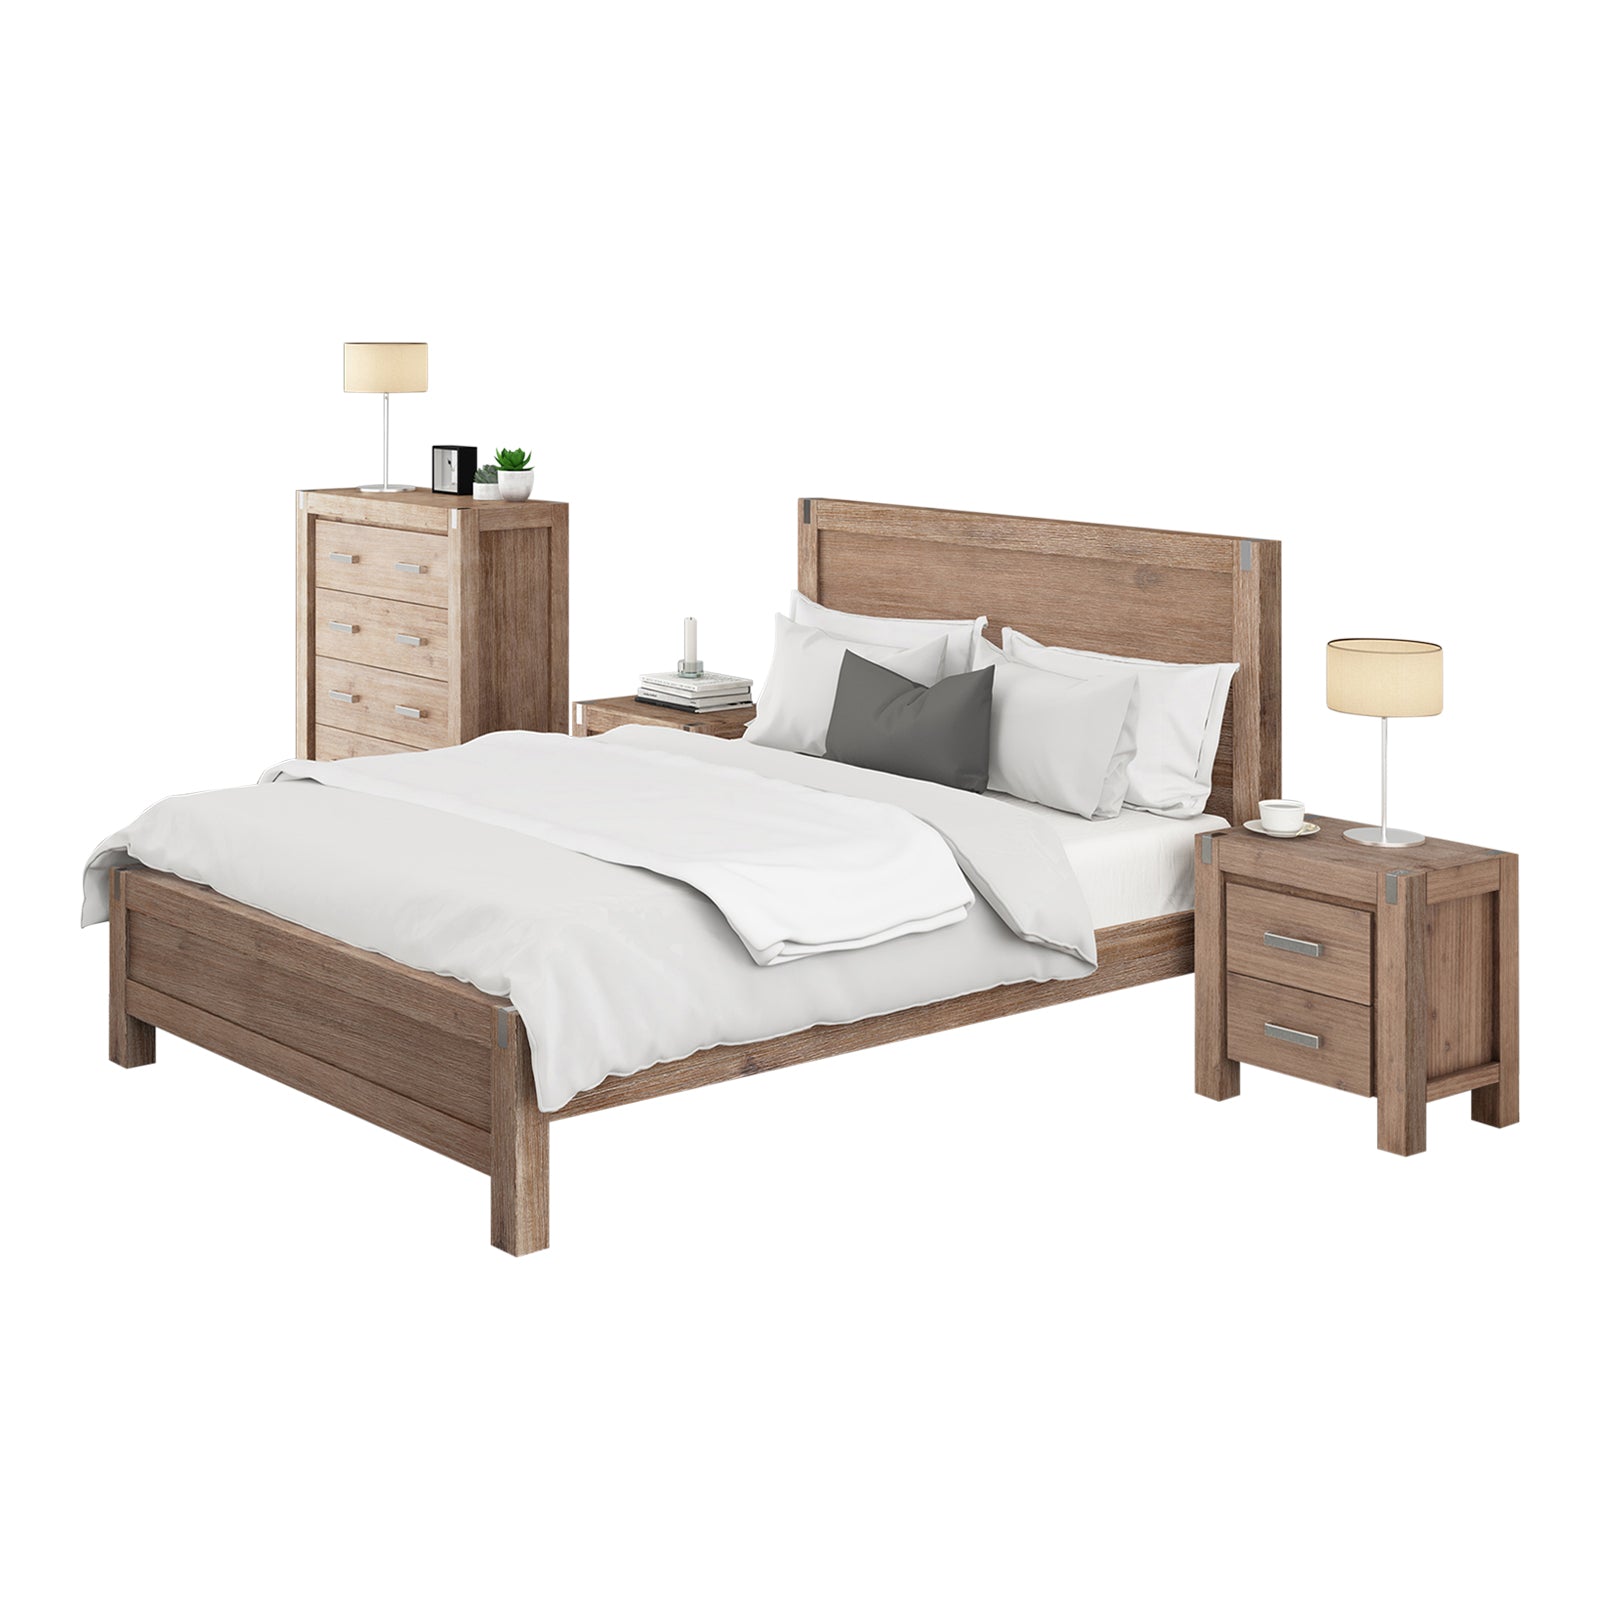 Noor 4 Pieces King Size Bedroom Suite Oak Colour with Tallboy